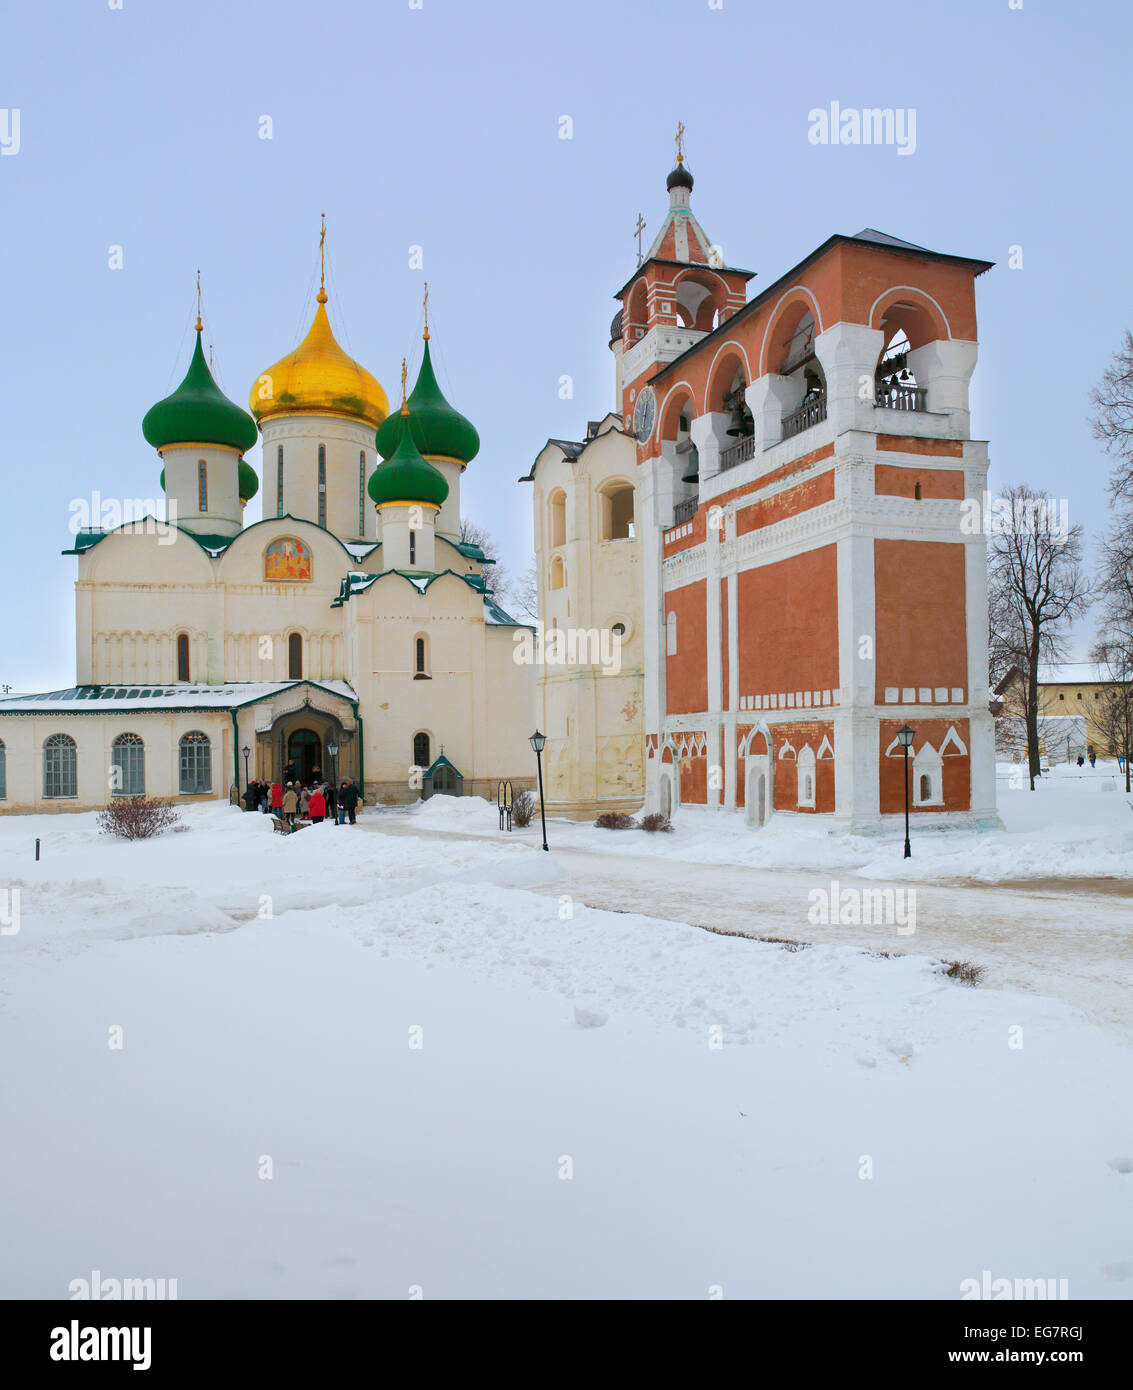 Transfiguration Cathedral and belfry, Monastery of St. Euthymius, Suzdal, Vladimir region, Russia Stock Photo